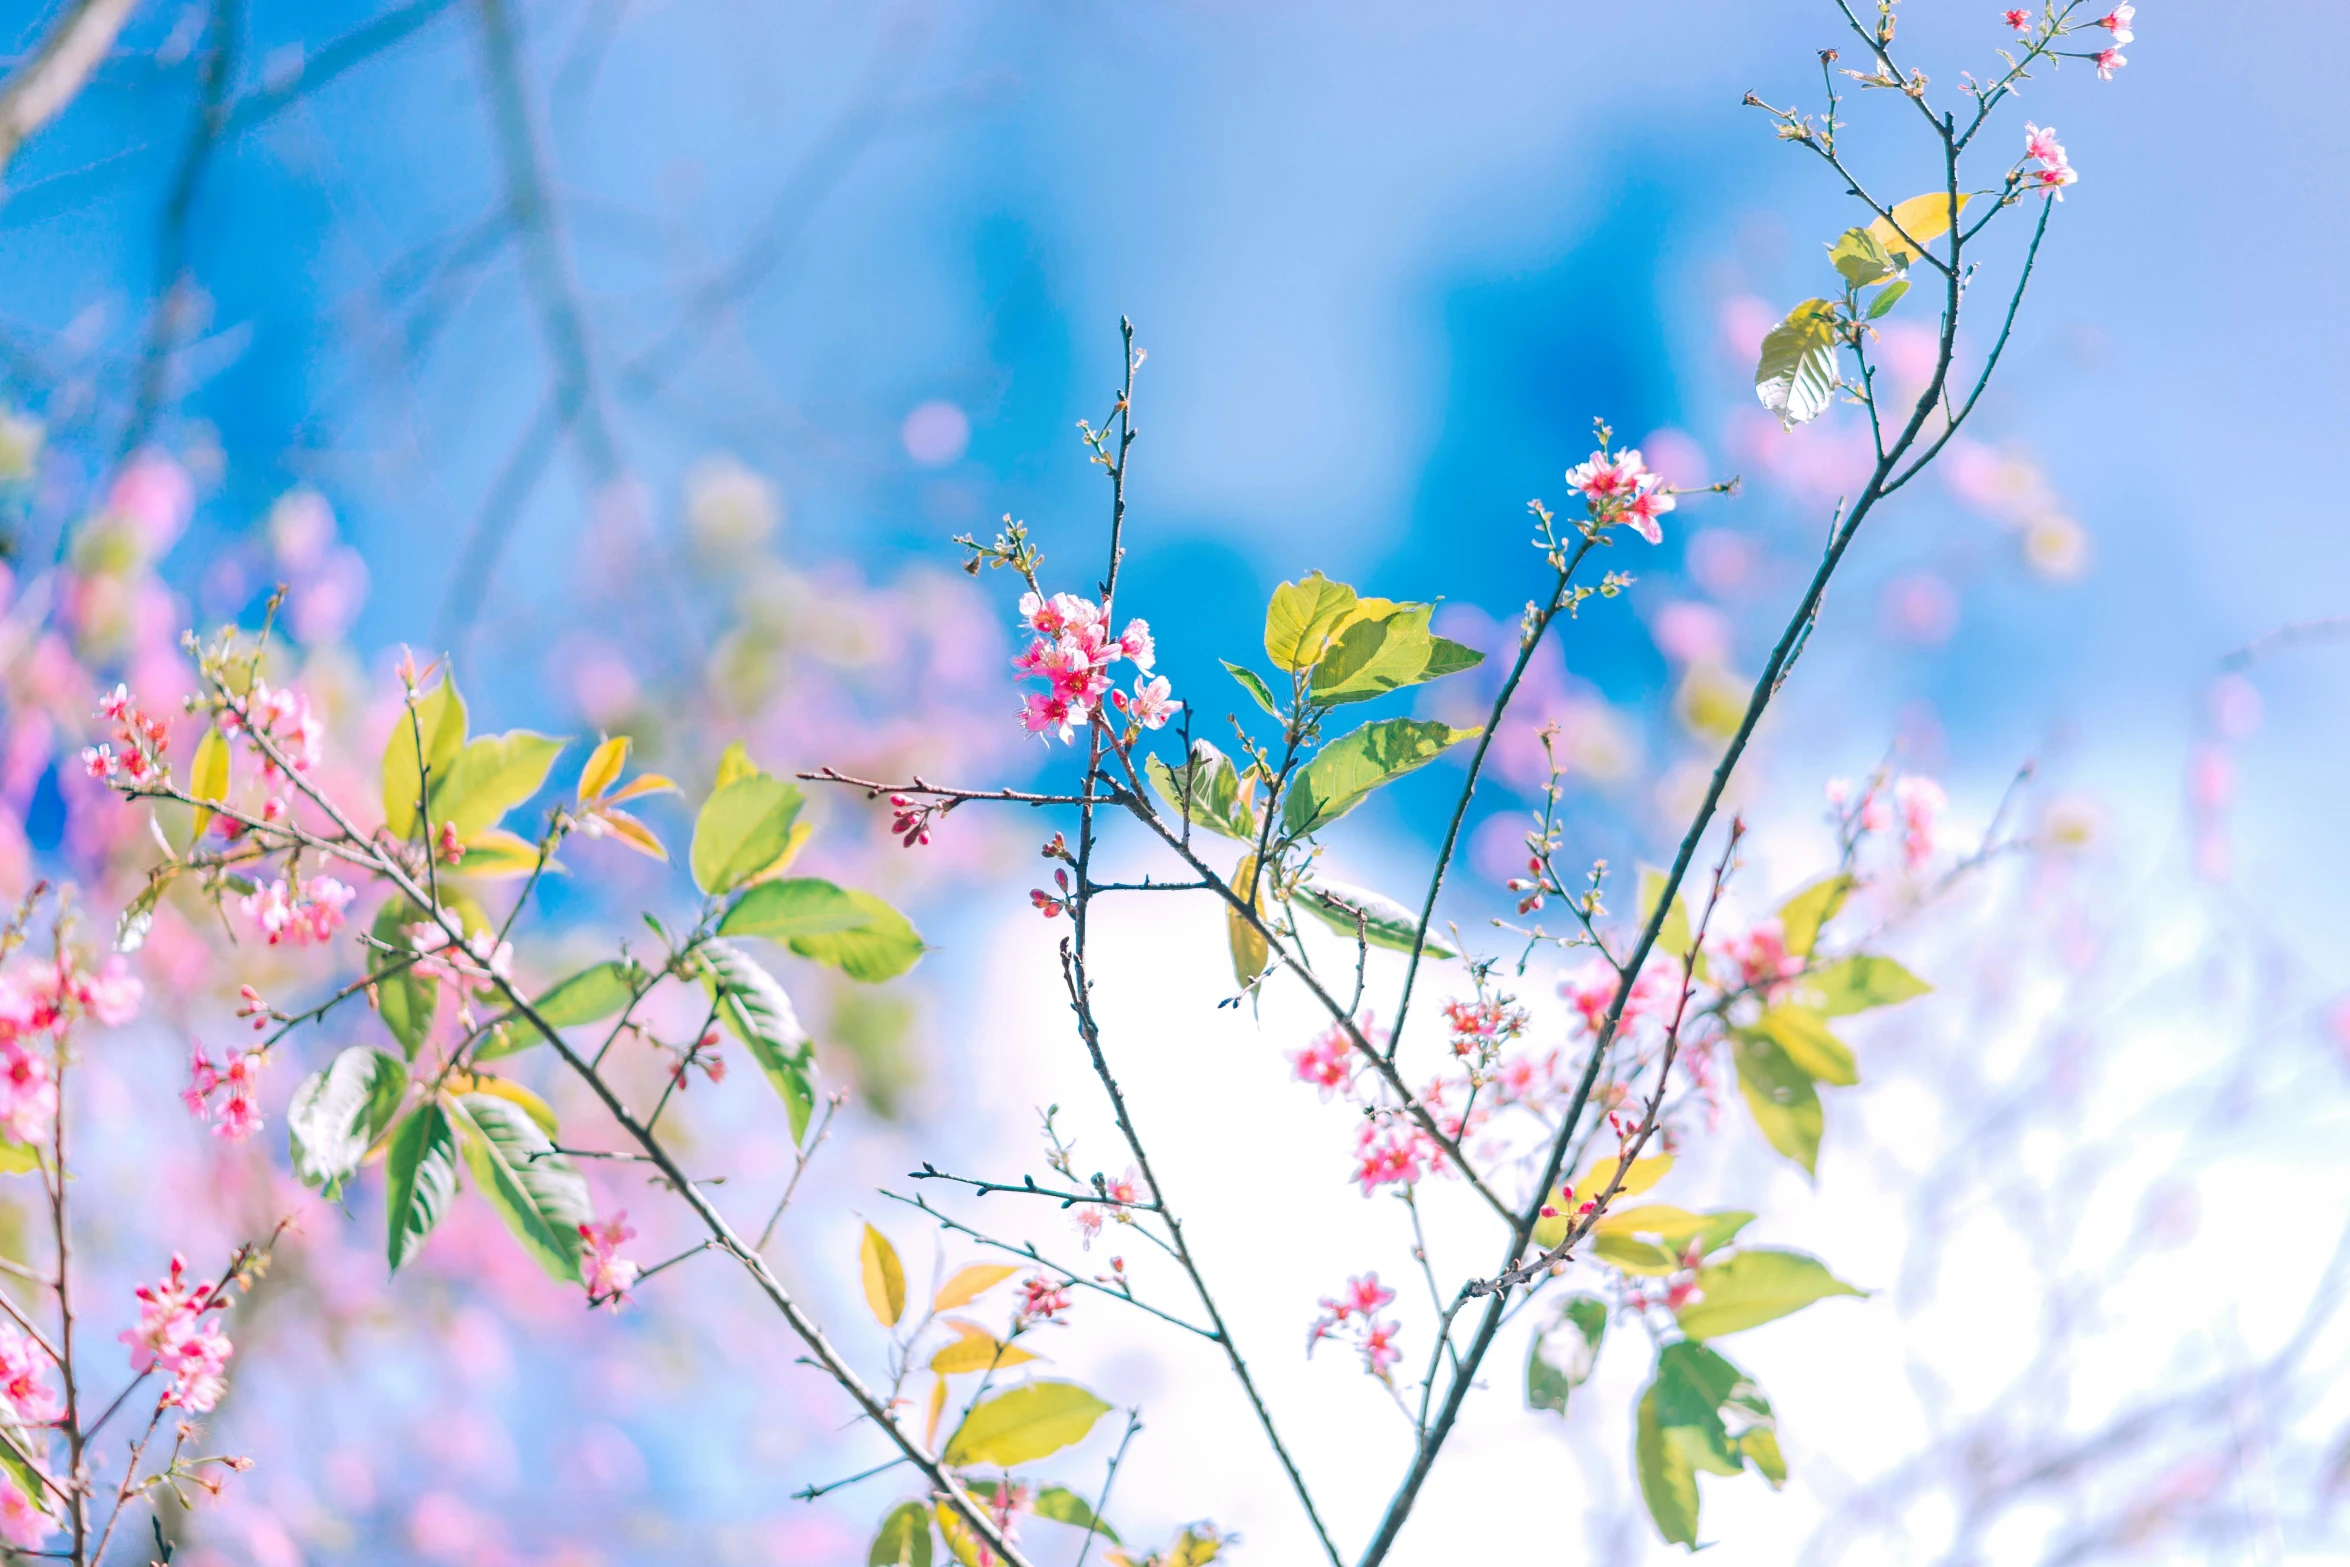 a bird sitting on top of a tree branch, by Rachel Reckitt, unsplash, aestheticism, pastel flower petals flying, blue and pink, low angle 8k hd nature photo, seasons!! : 🌸 ☀ 🍂 ❄